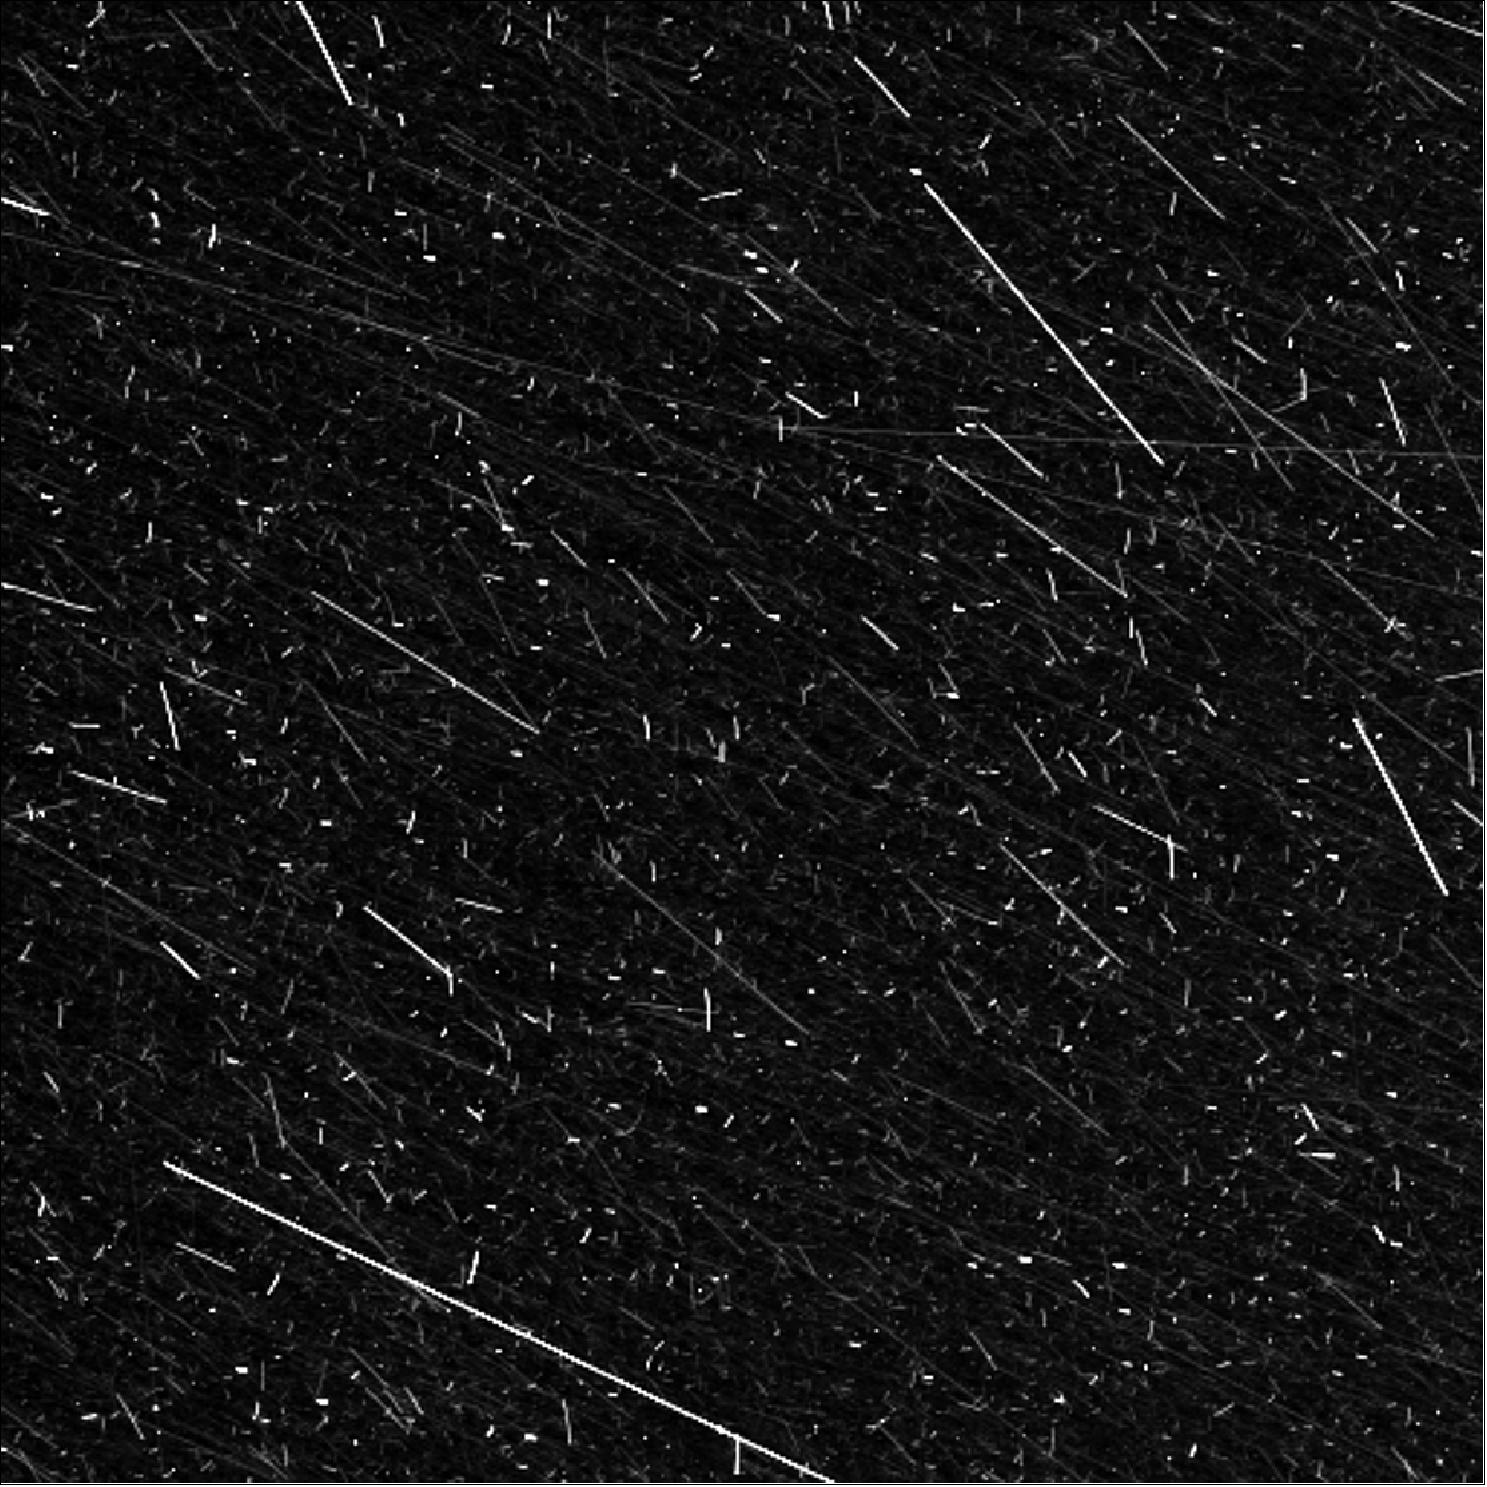 Figure 76: This stormy day image was taken with the OSIRIS narrow angle camera two years ago, on 21 January 2016, when Rosetta was flying 79 km from the comet (image credit: ESA/Rosetta/MPS for OSIRIS Team MPS/UPD/LAM/IAA/SSO/INTA/UPM/DASP/IDA)